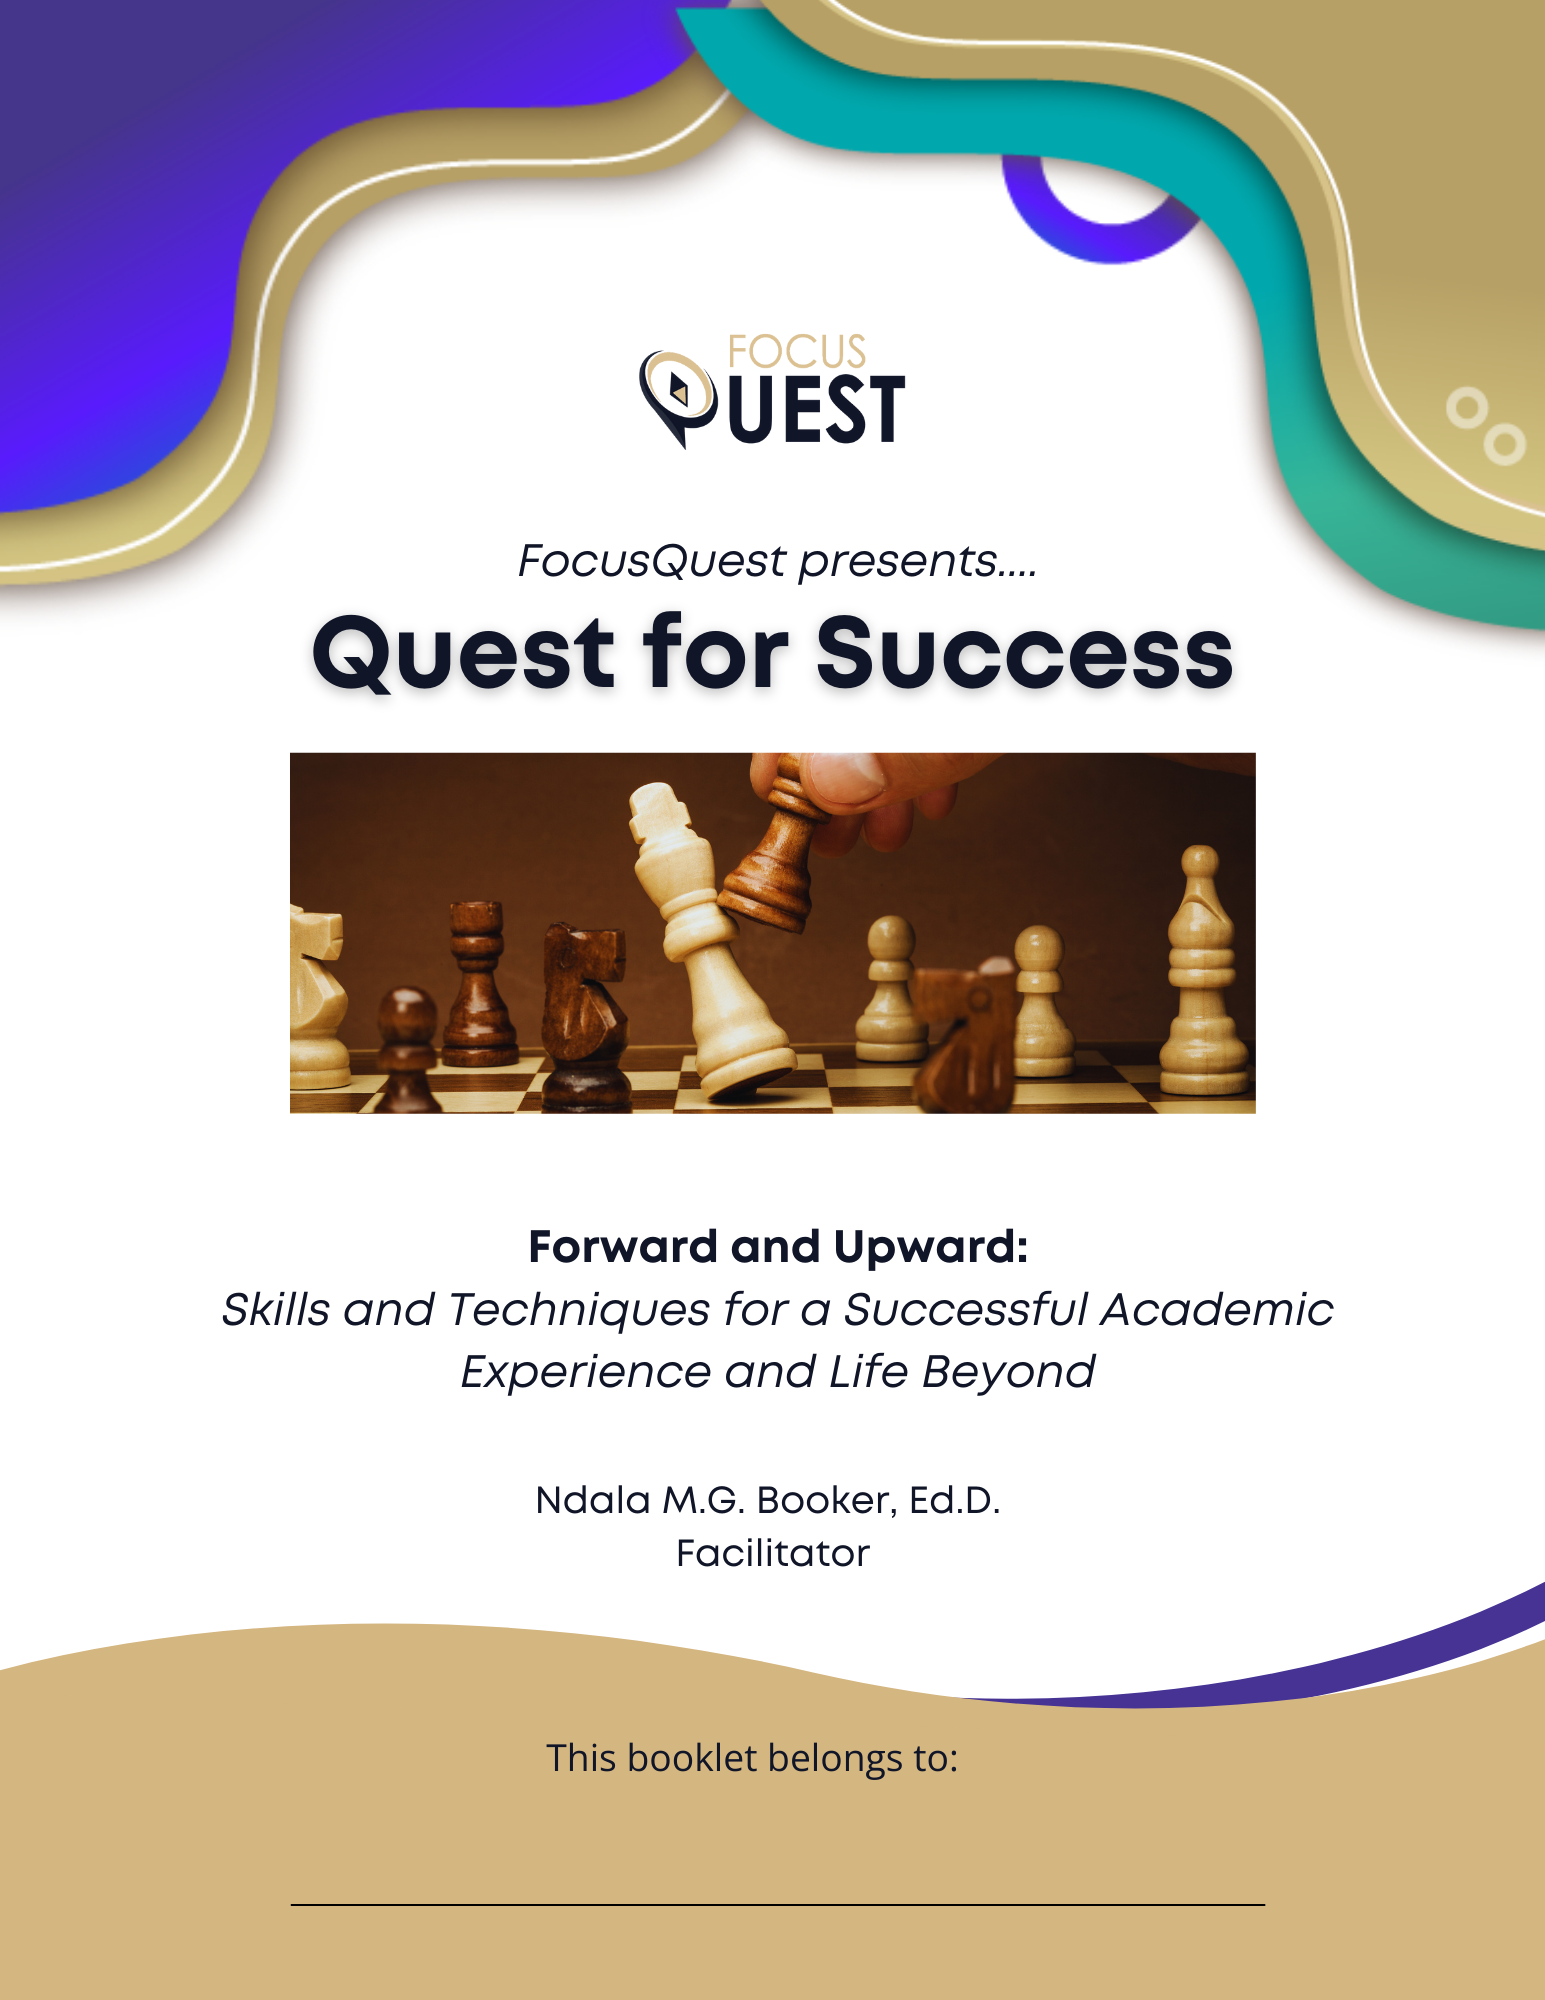 FocusQuest - Quest for Success - Skills and Techniques for a Successful Academic Experience and Life Beyond